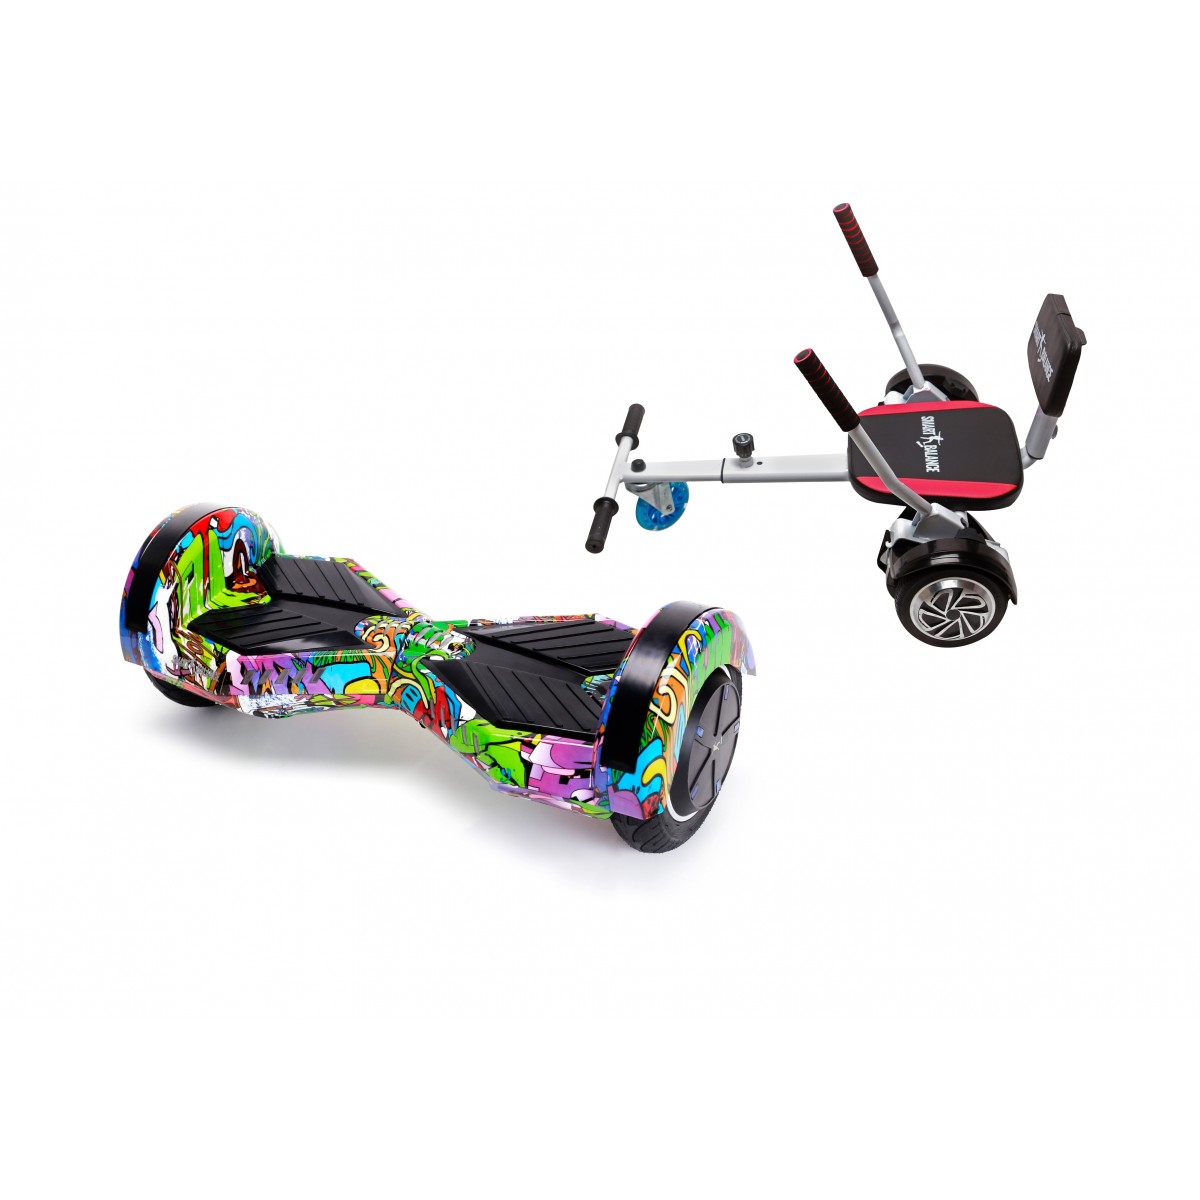 Package Smart Balance Hoverboard 6.5 inch, Transformers Multicolor + Hoverseat with Sponge, Motor 700 Wat, - Spanish